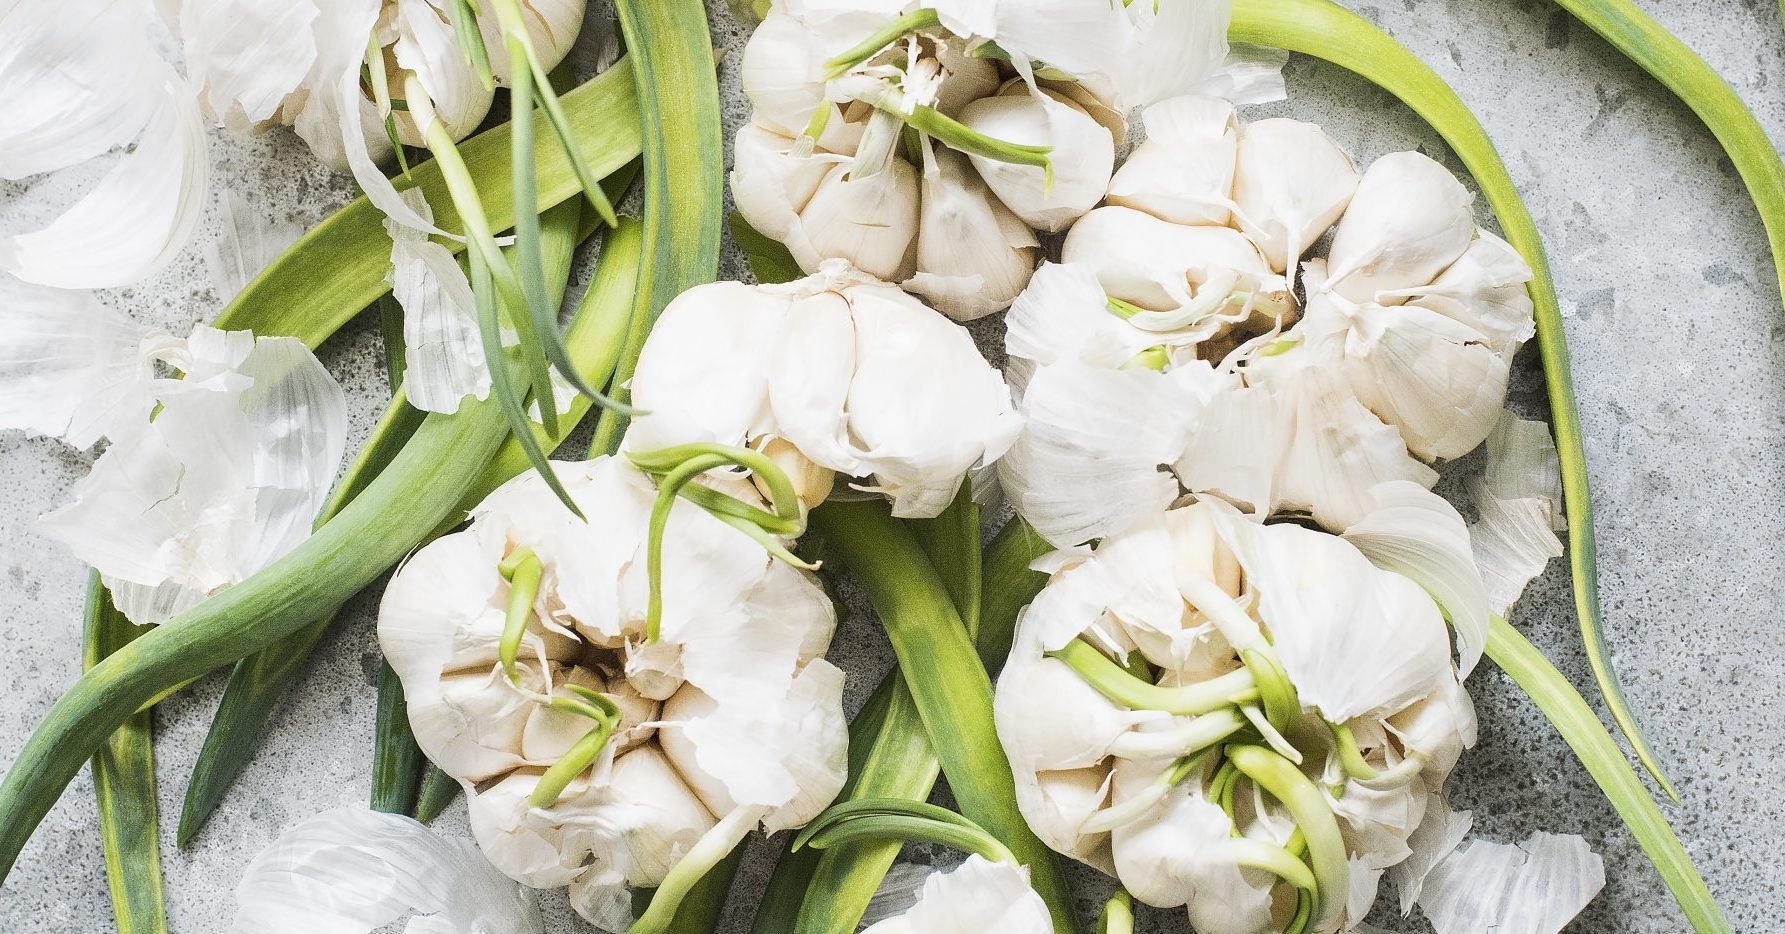 Is Sprouted Garlic Safe to Eat?